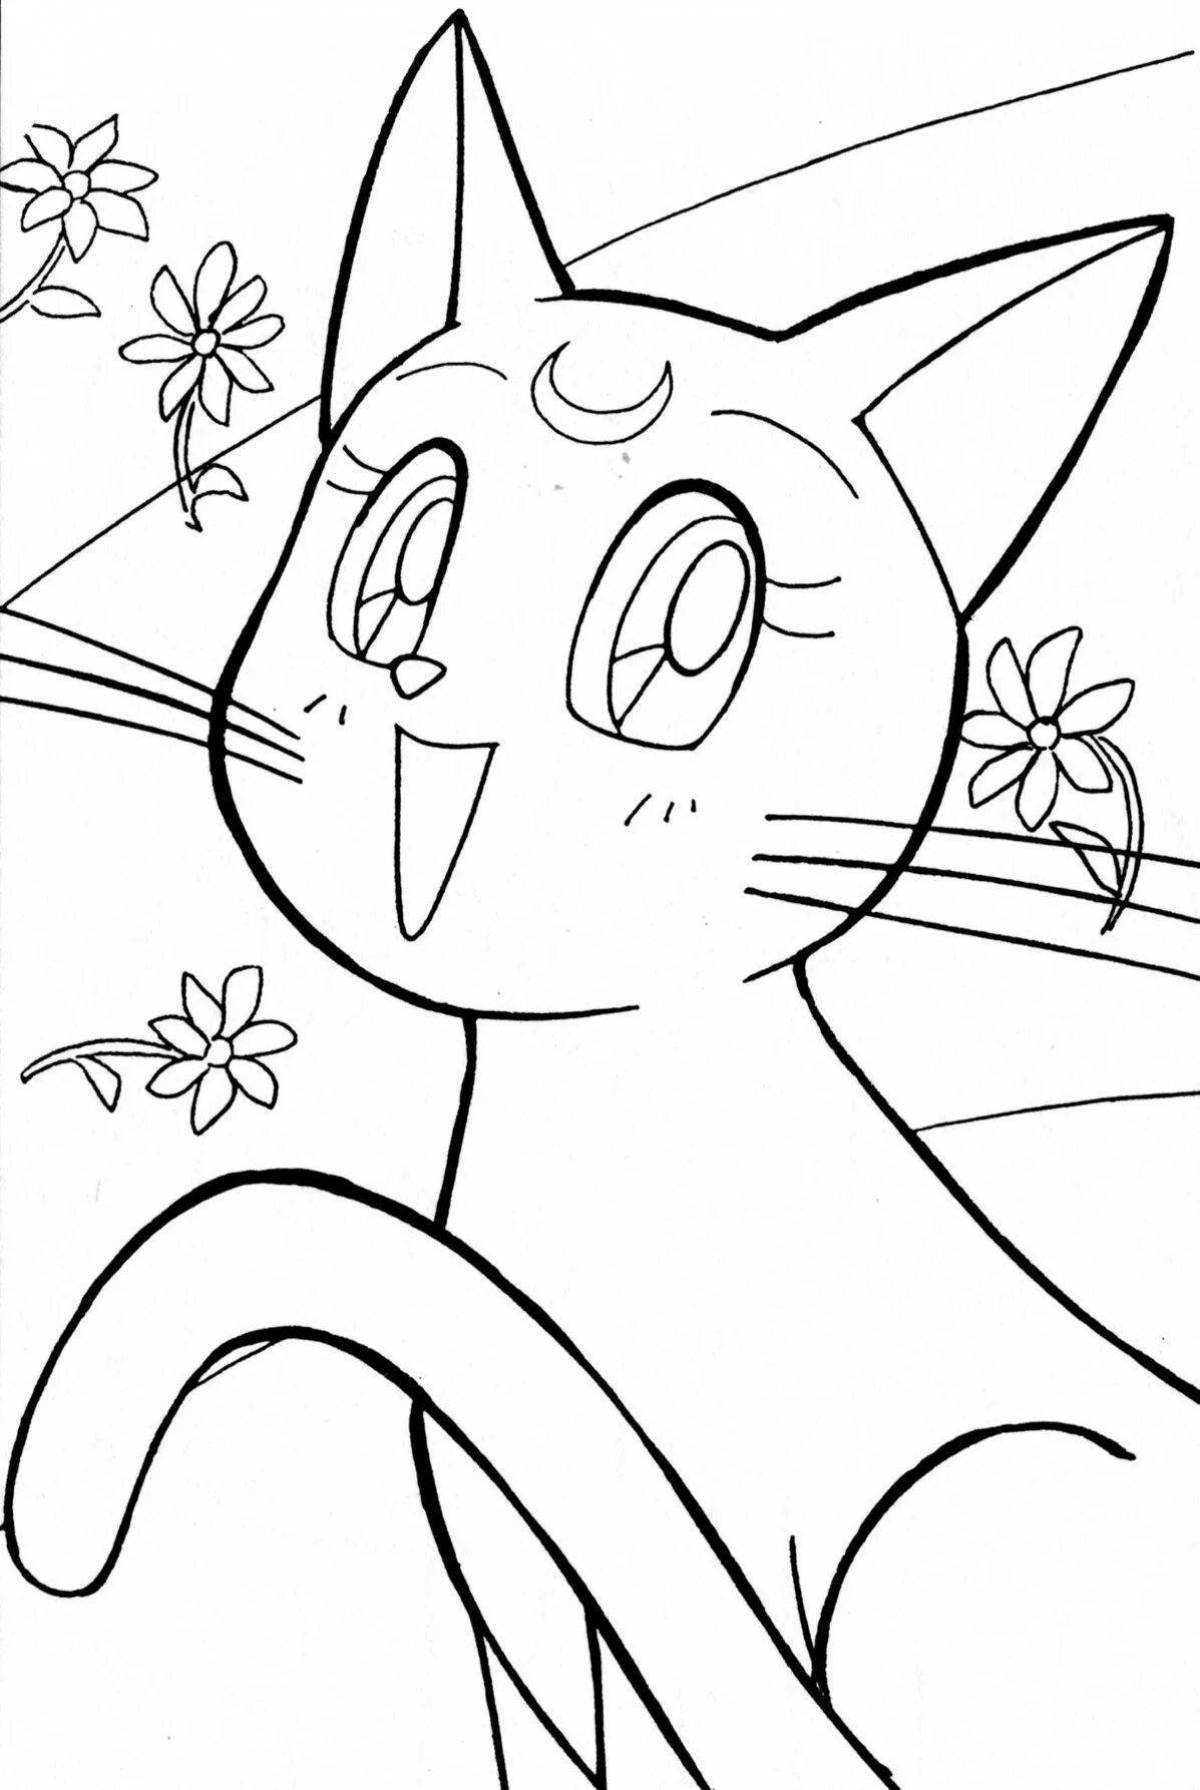 Charming anime kitty coloring book